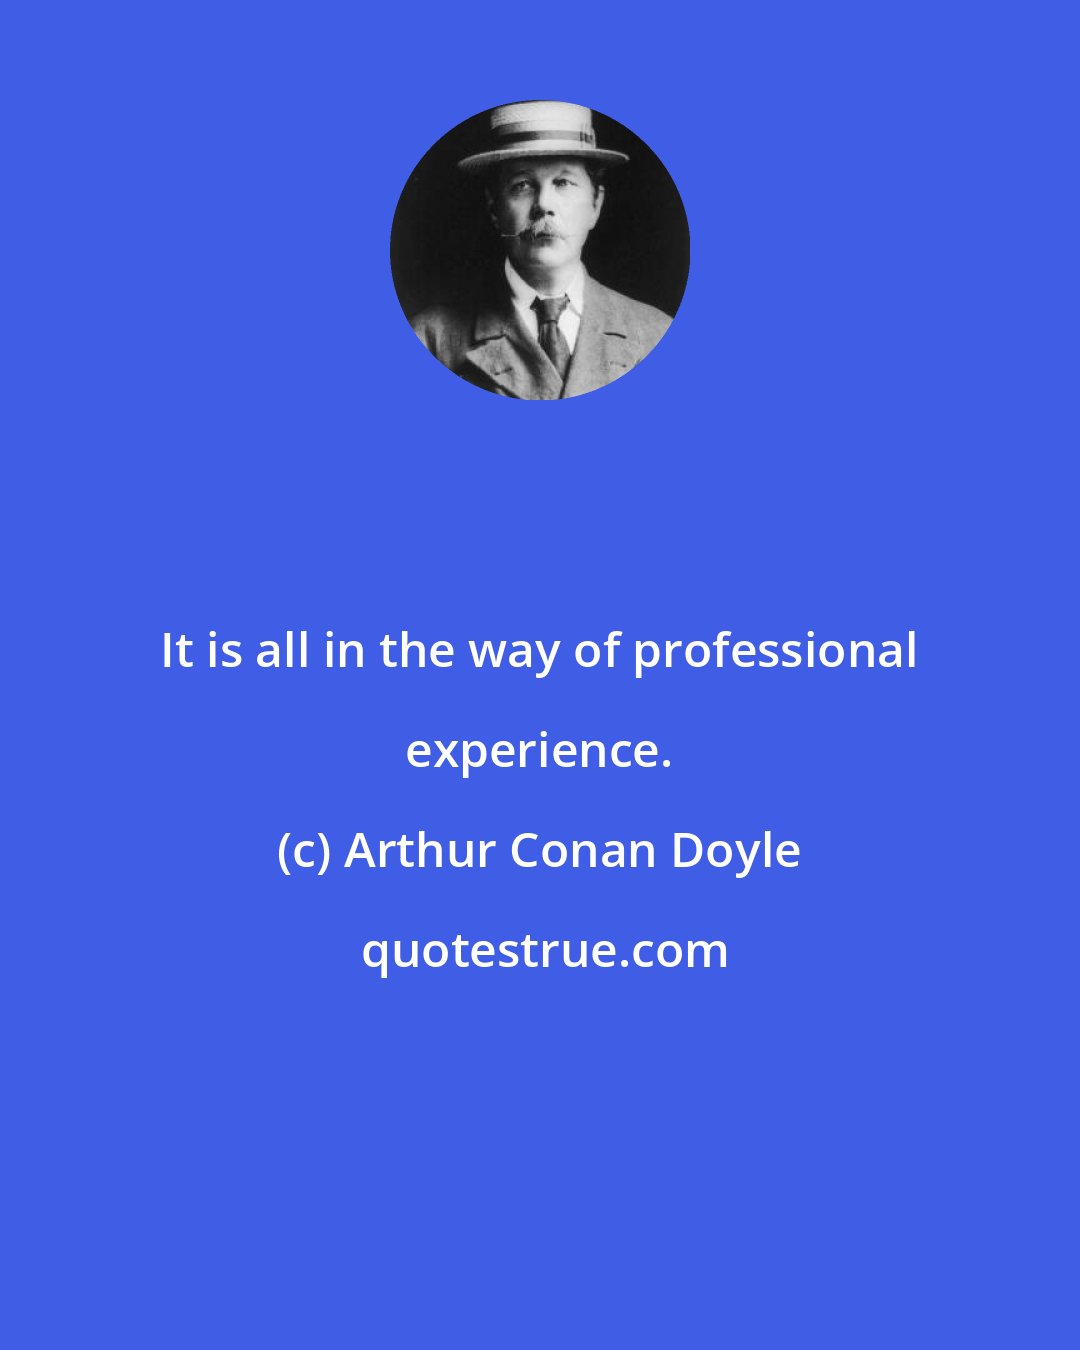 Arthur Conan Doyle: It is all in the way of professional experience.